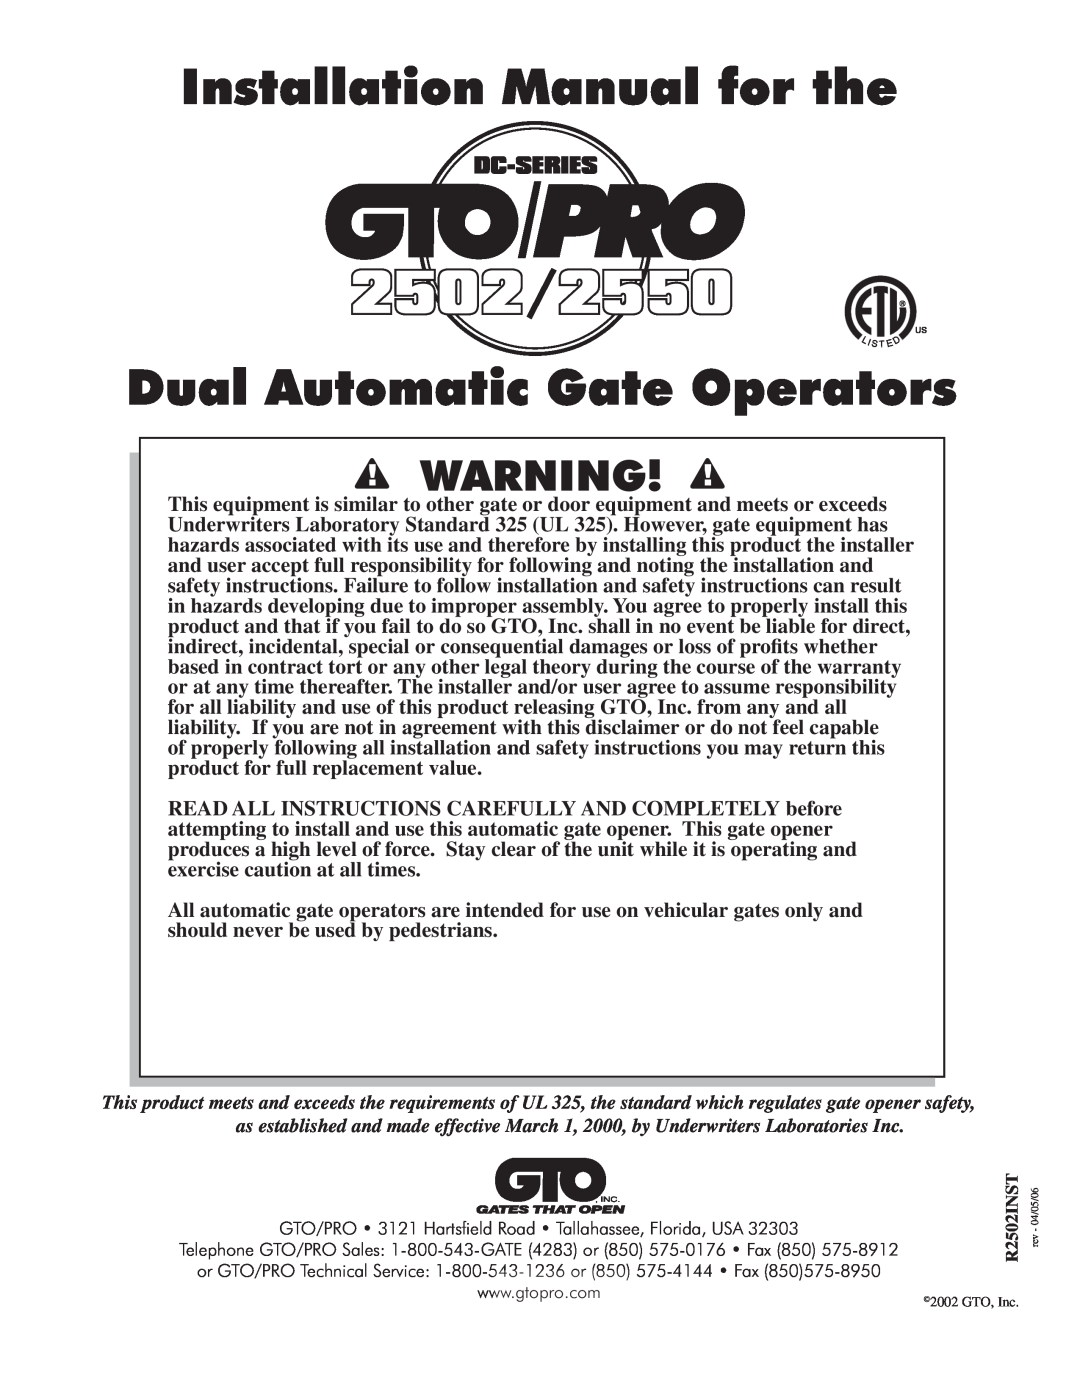 GTO 2550 installation manual Installation Manual for the, Dual Automatic Gate Operators, R2502INST 